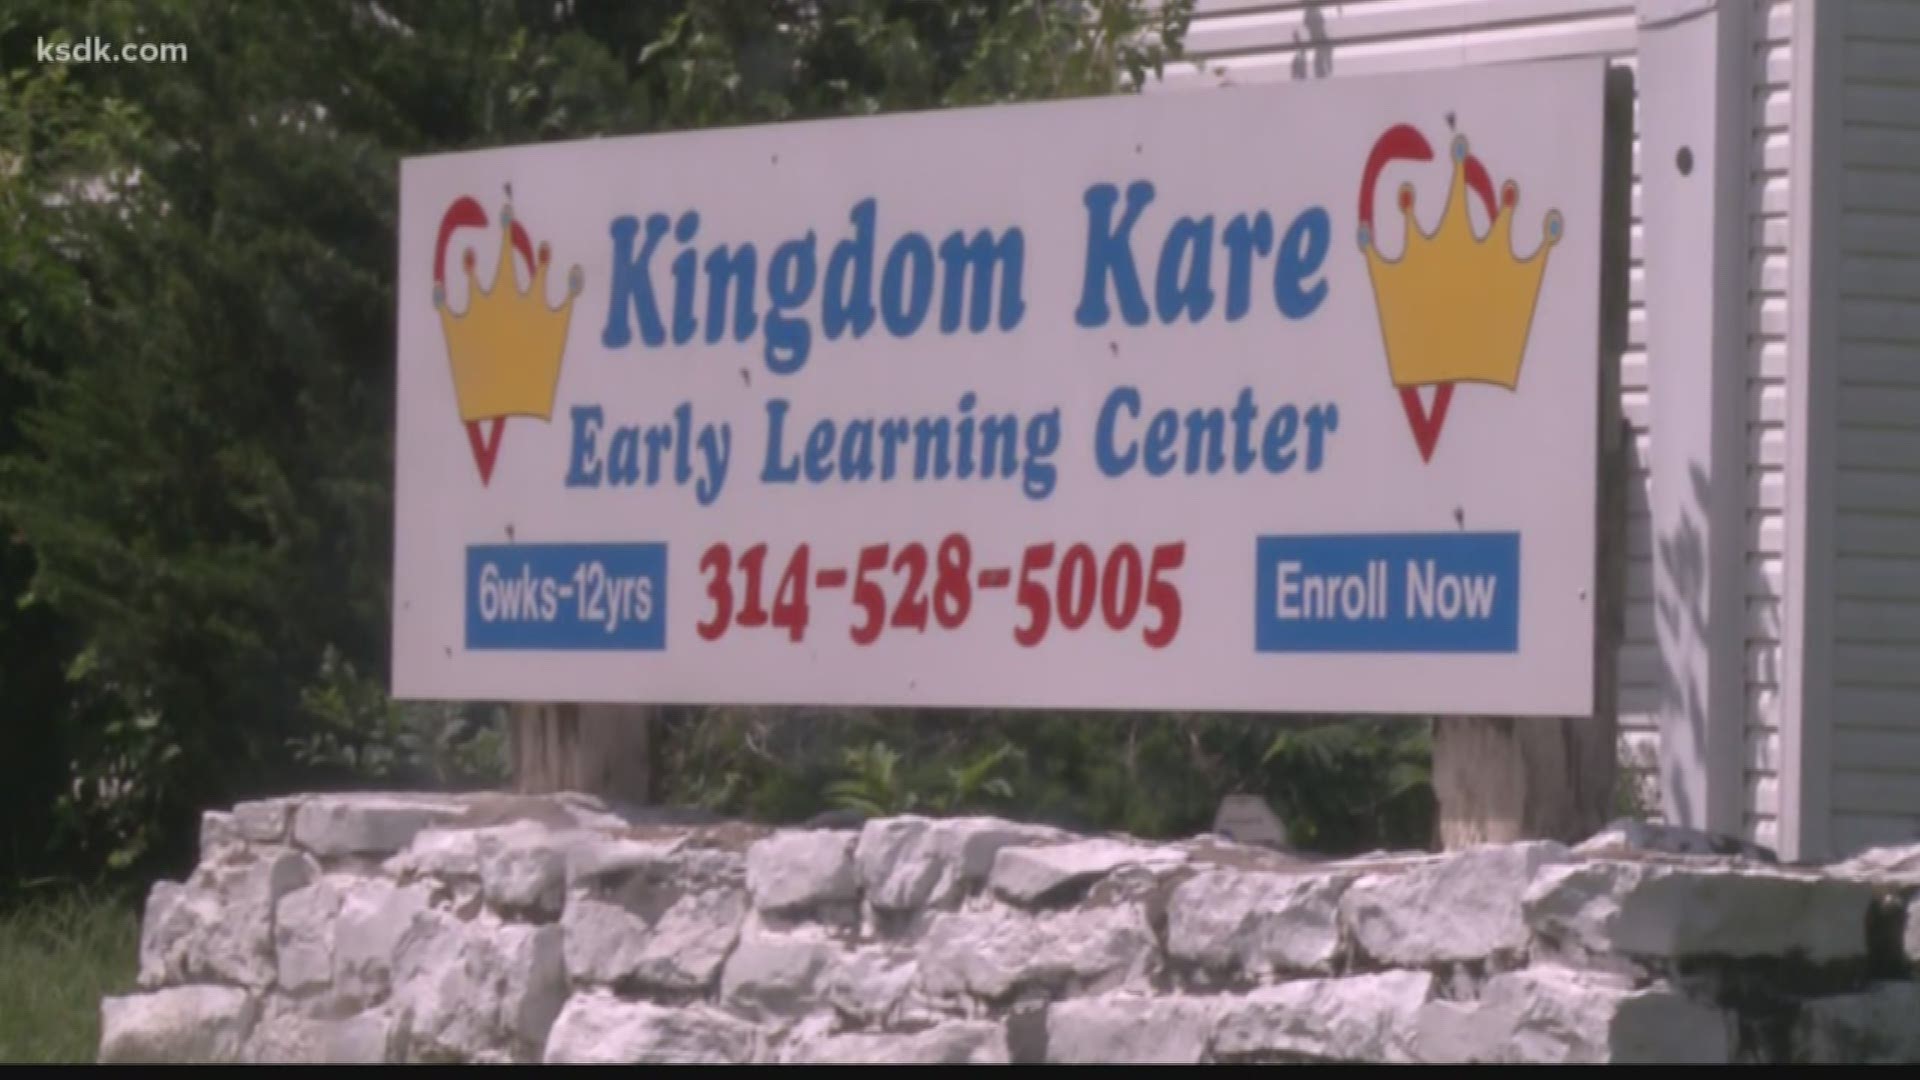 St. Louis County Police said the mom's boyfriend accidentally dropped them off at the wrong daycare, while the mom is in the hospital.